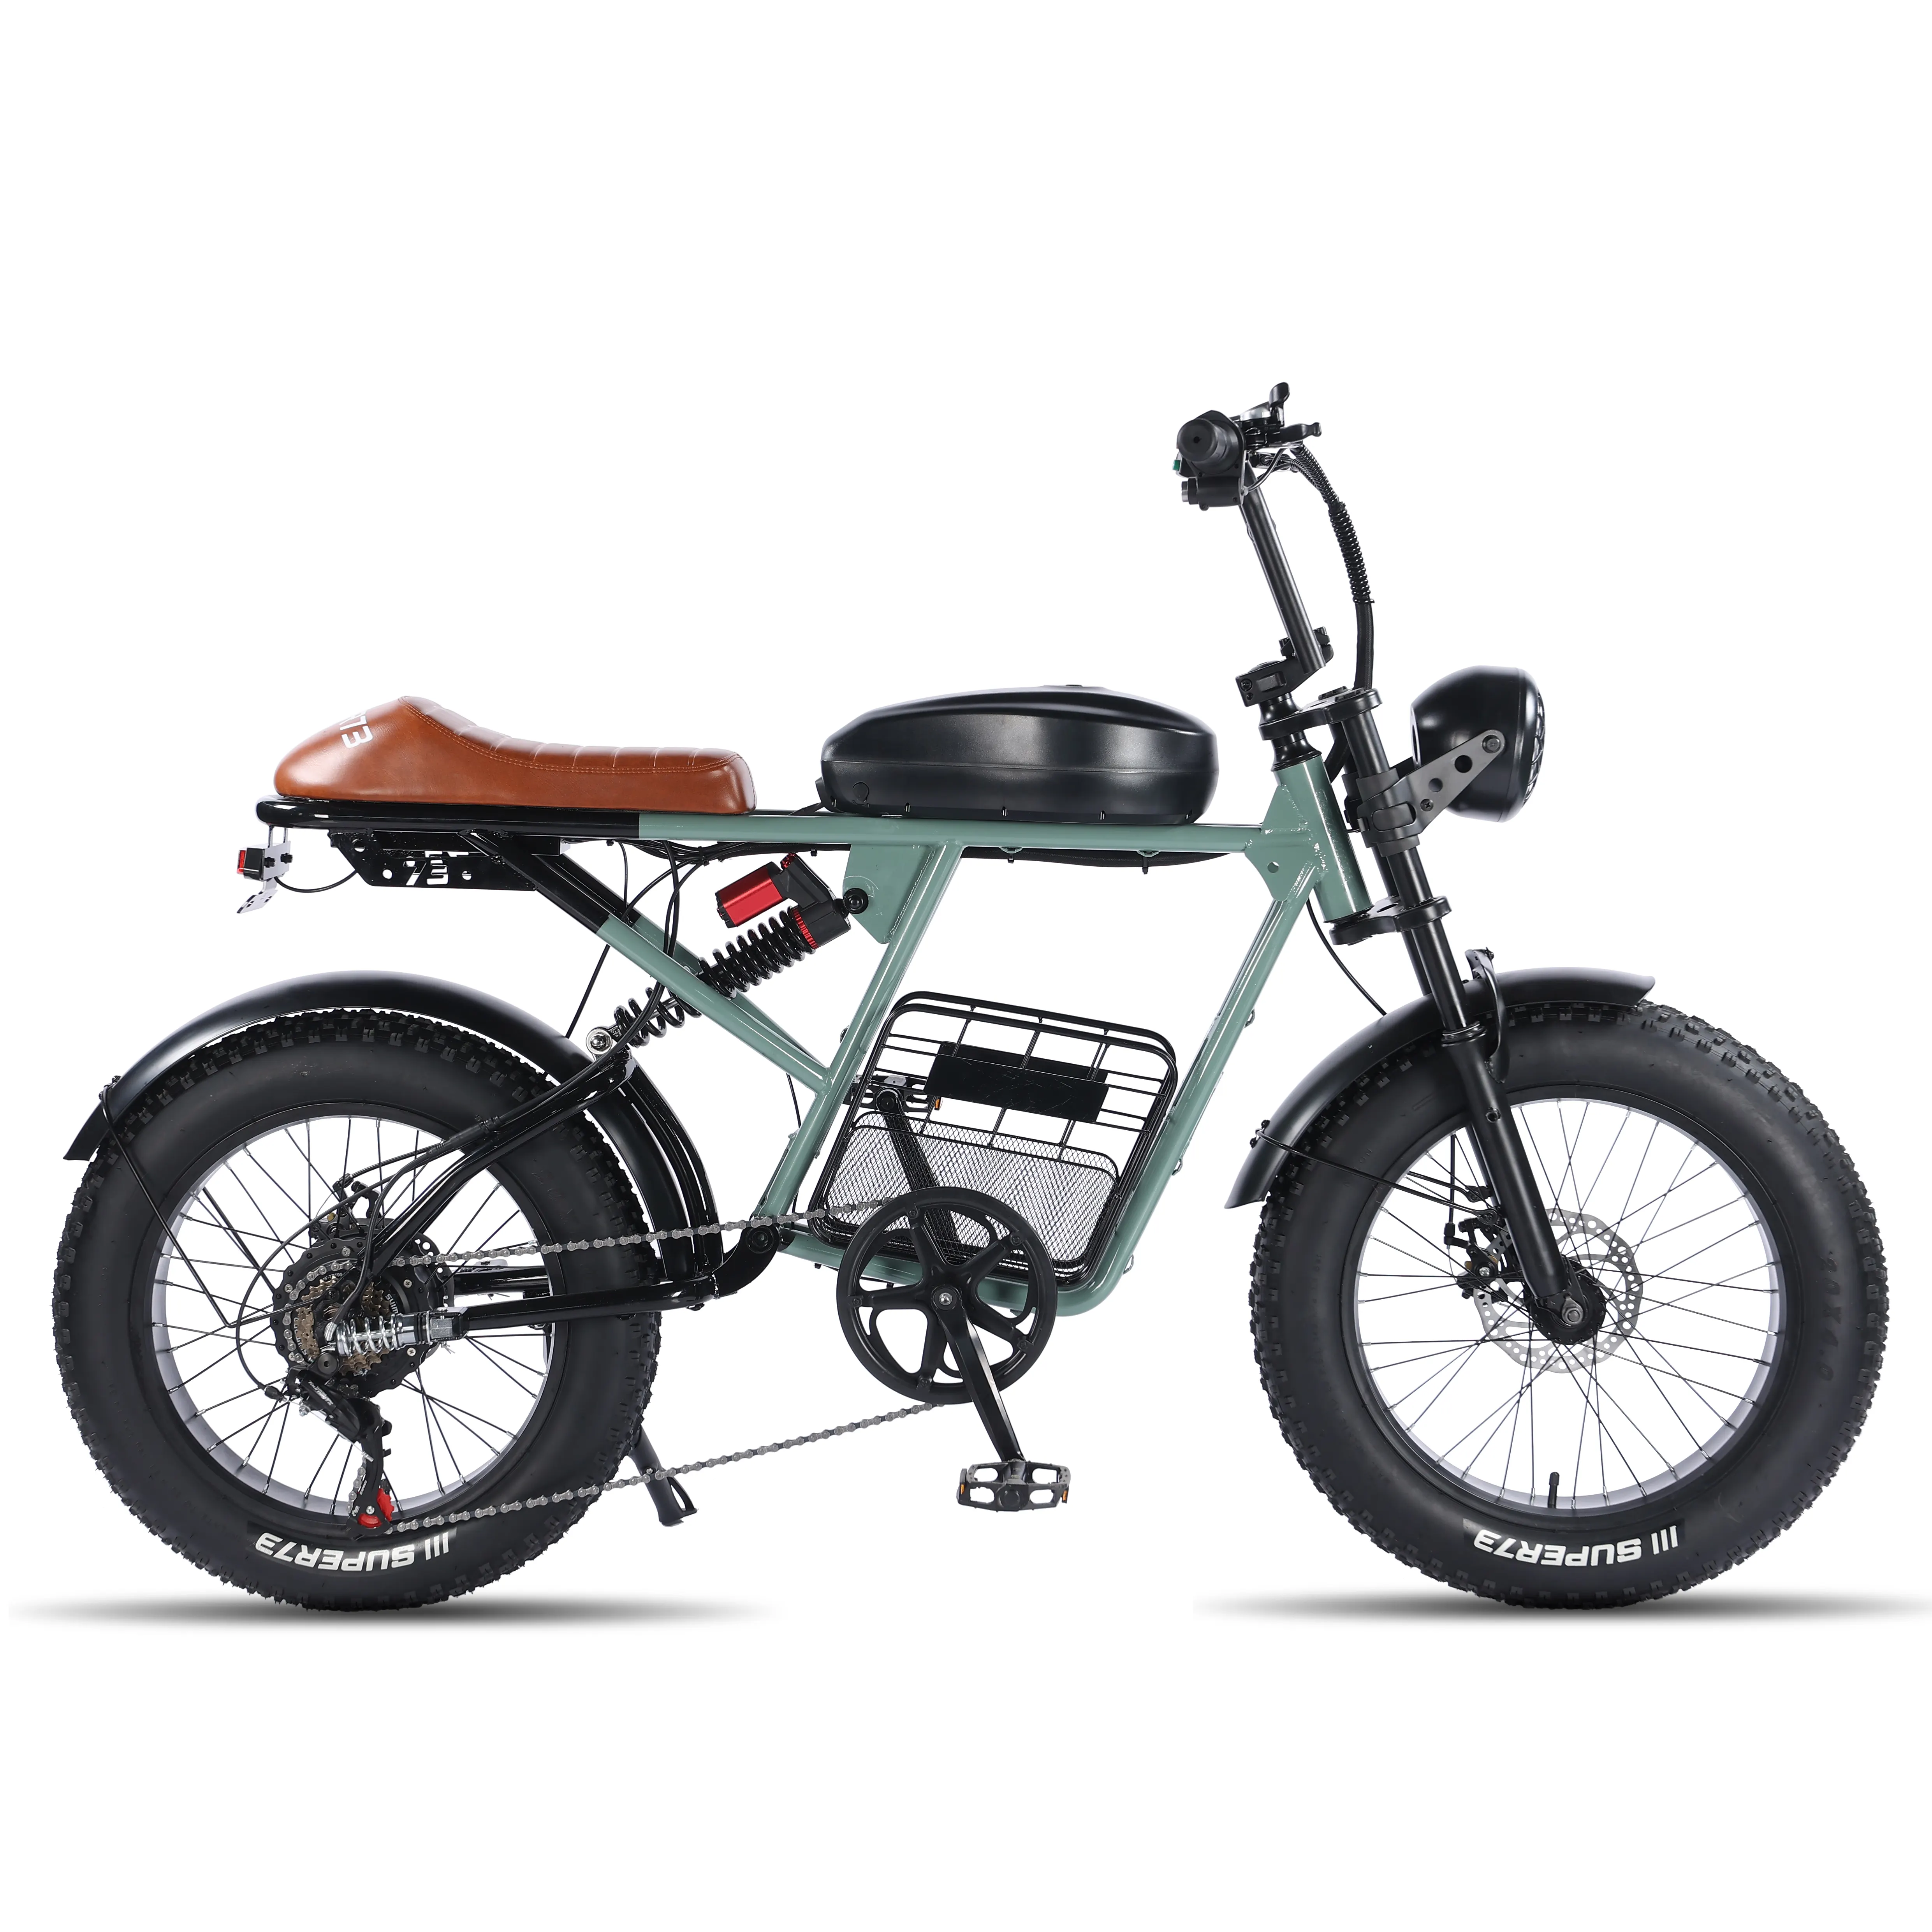 Wholesale customized cheapest electric mountain bicycle mid-drive motor bike 250w City shopping bike ebike for ladies